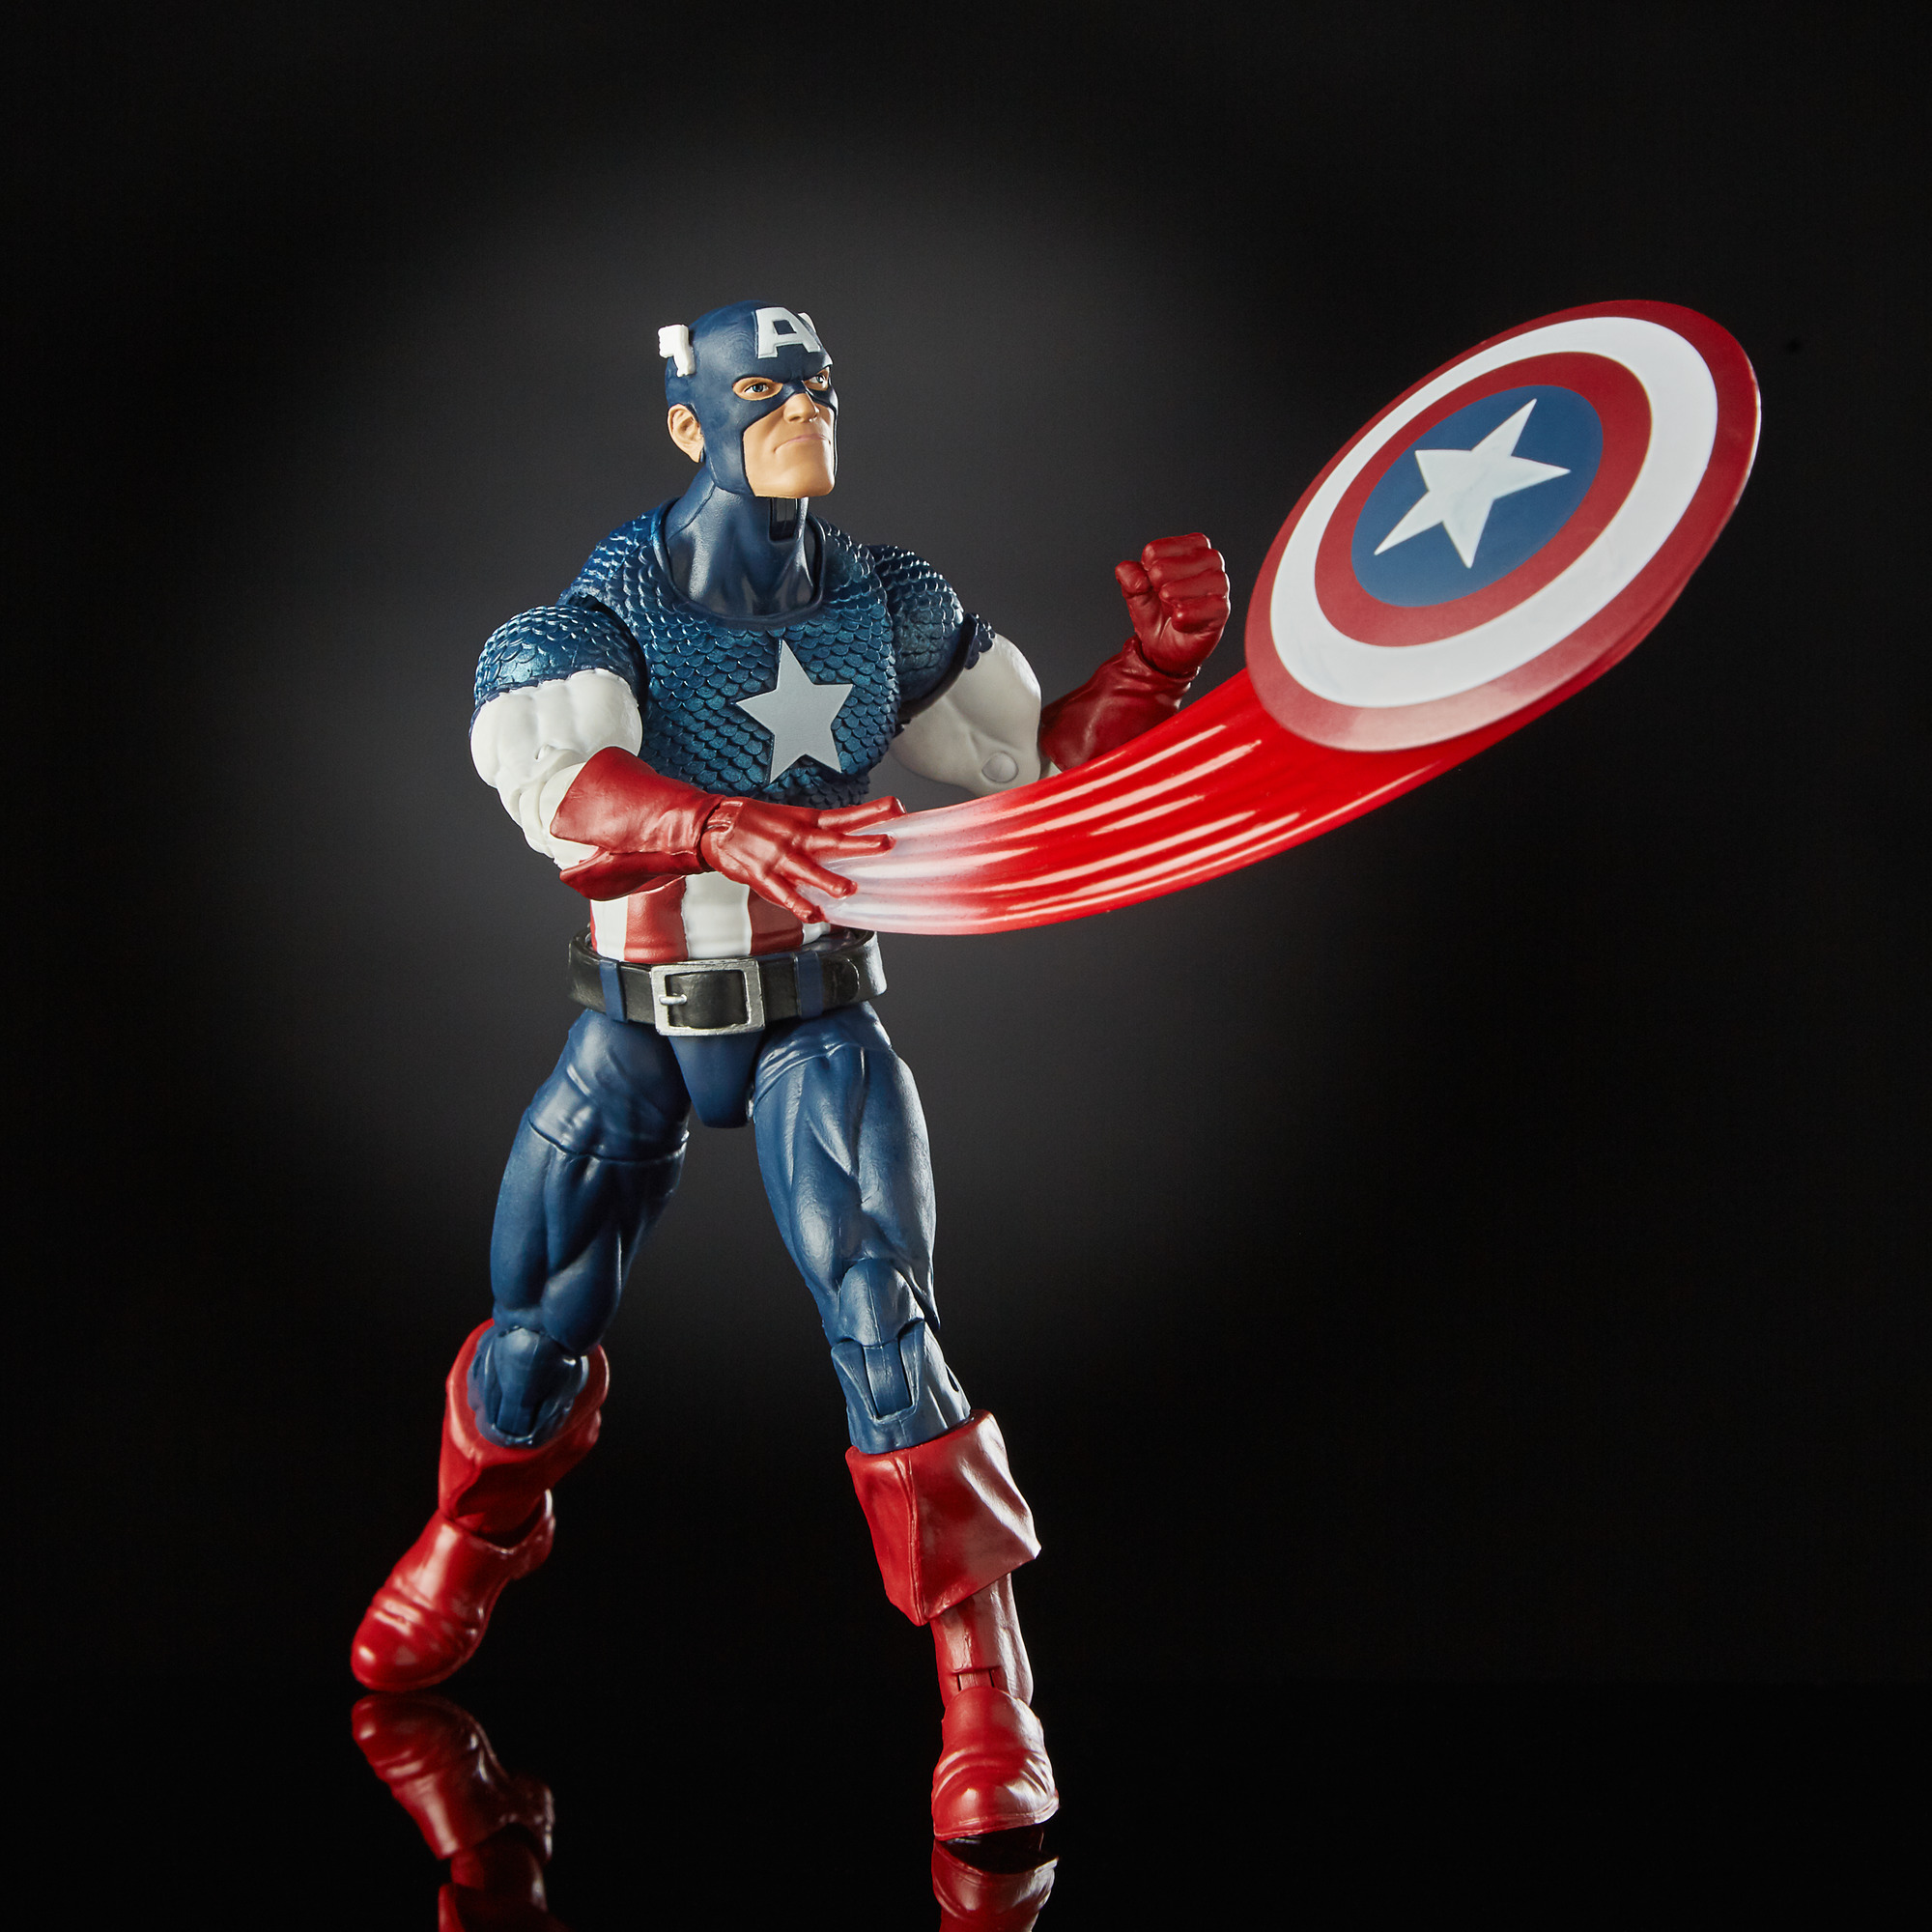 Marvel Legends Series 80th Anniversary Captain America - image 8 of 10